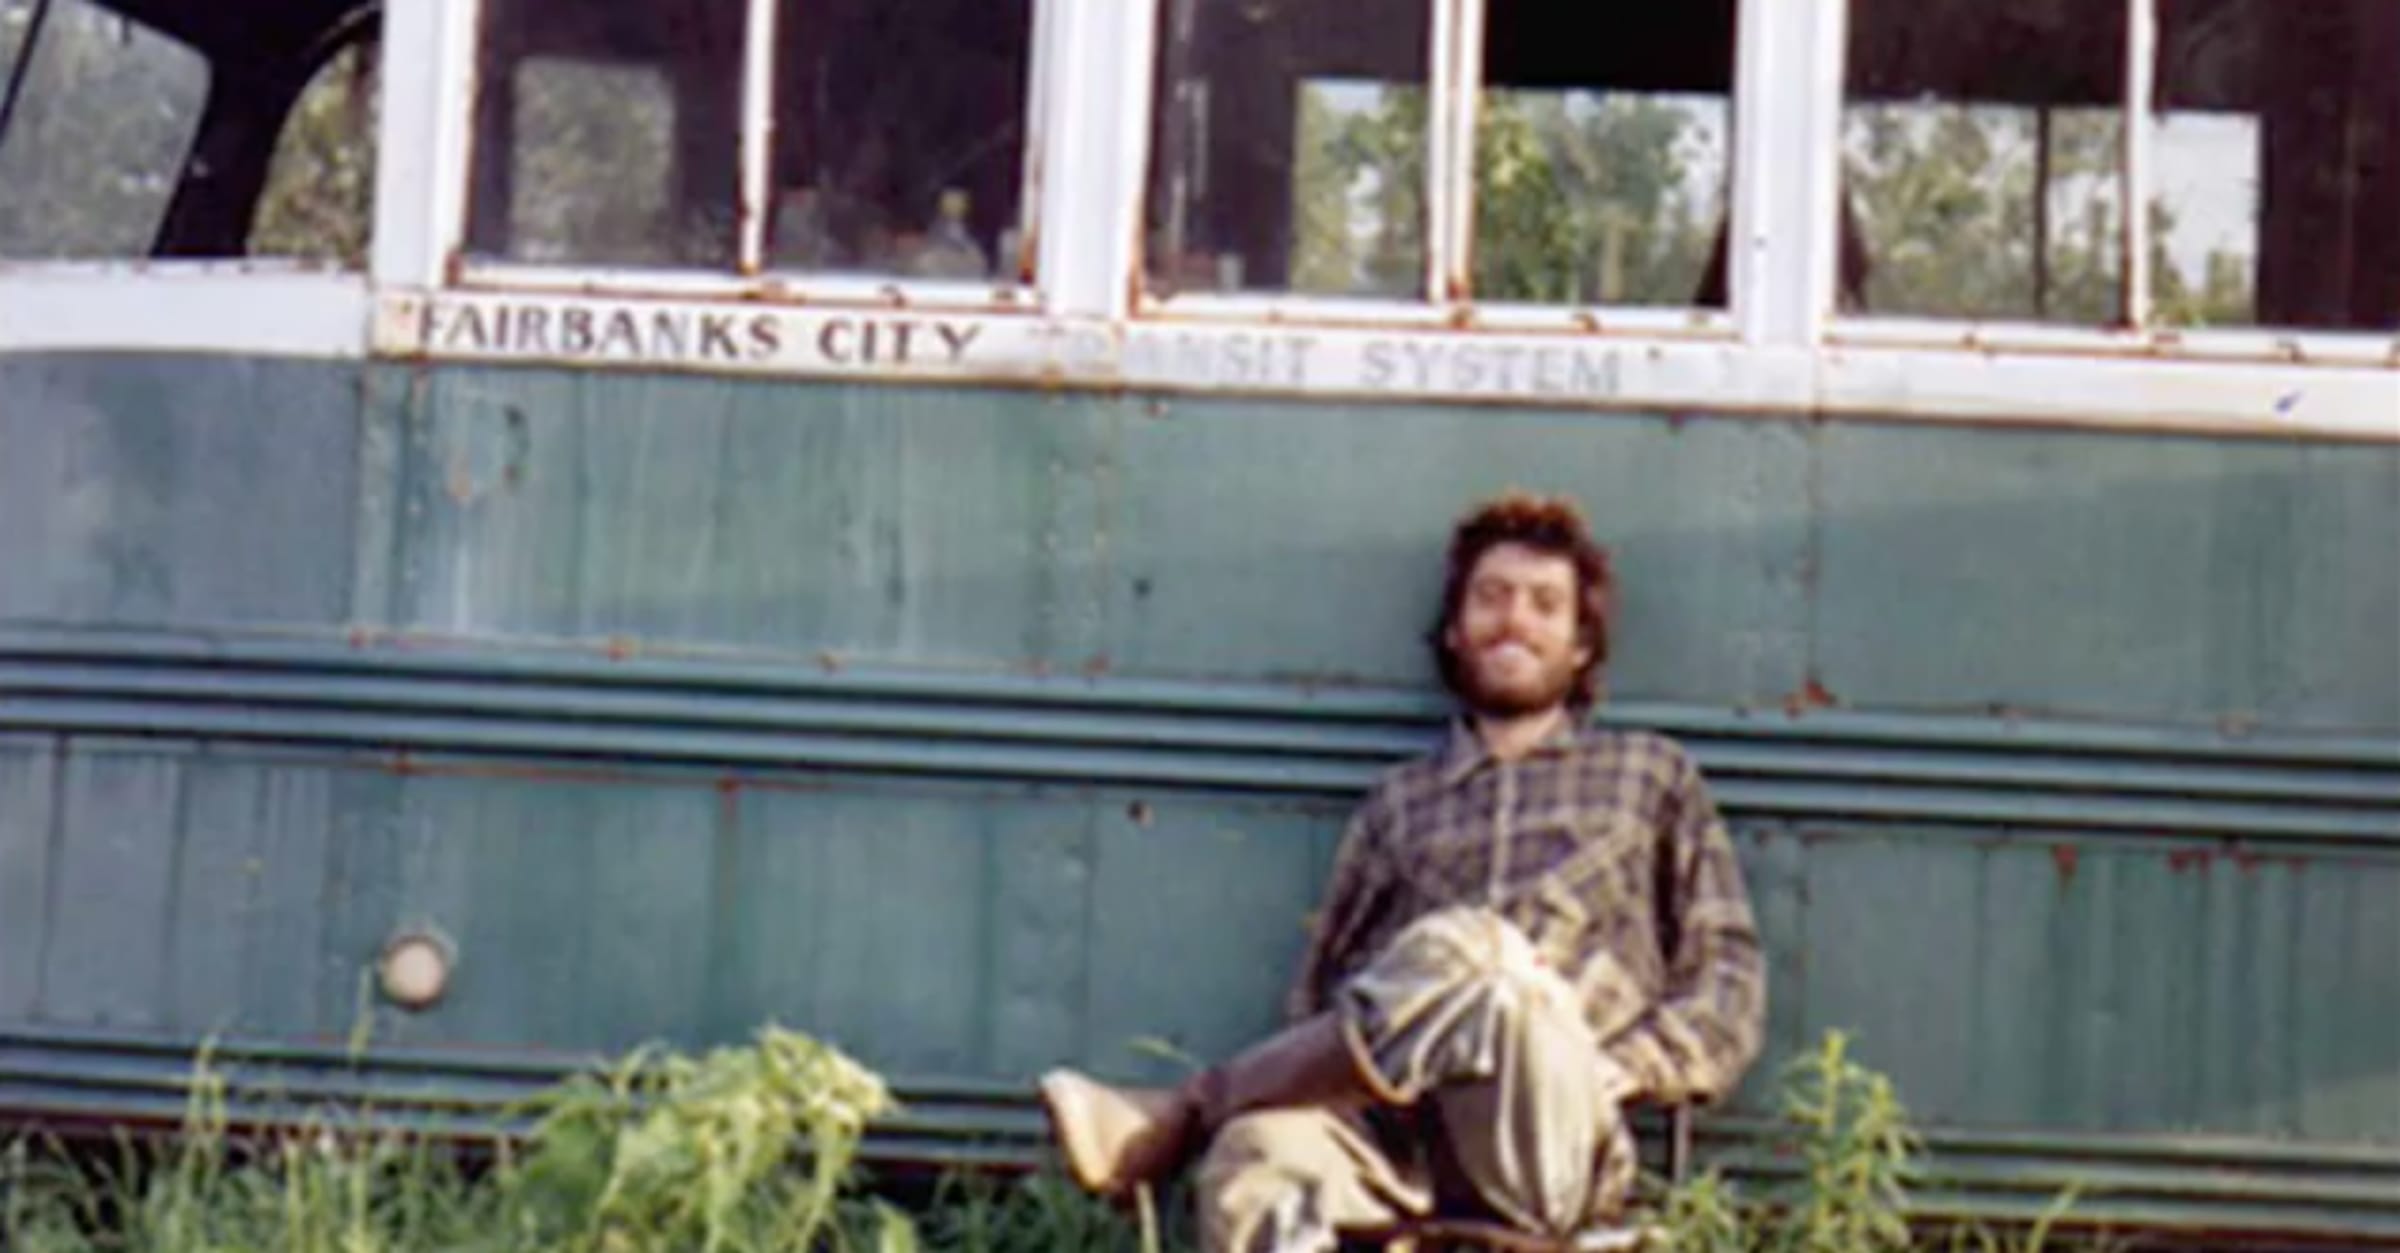 The Sad Tale Of Christopher McCandless - The Man From Into The Wild